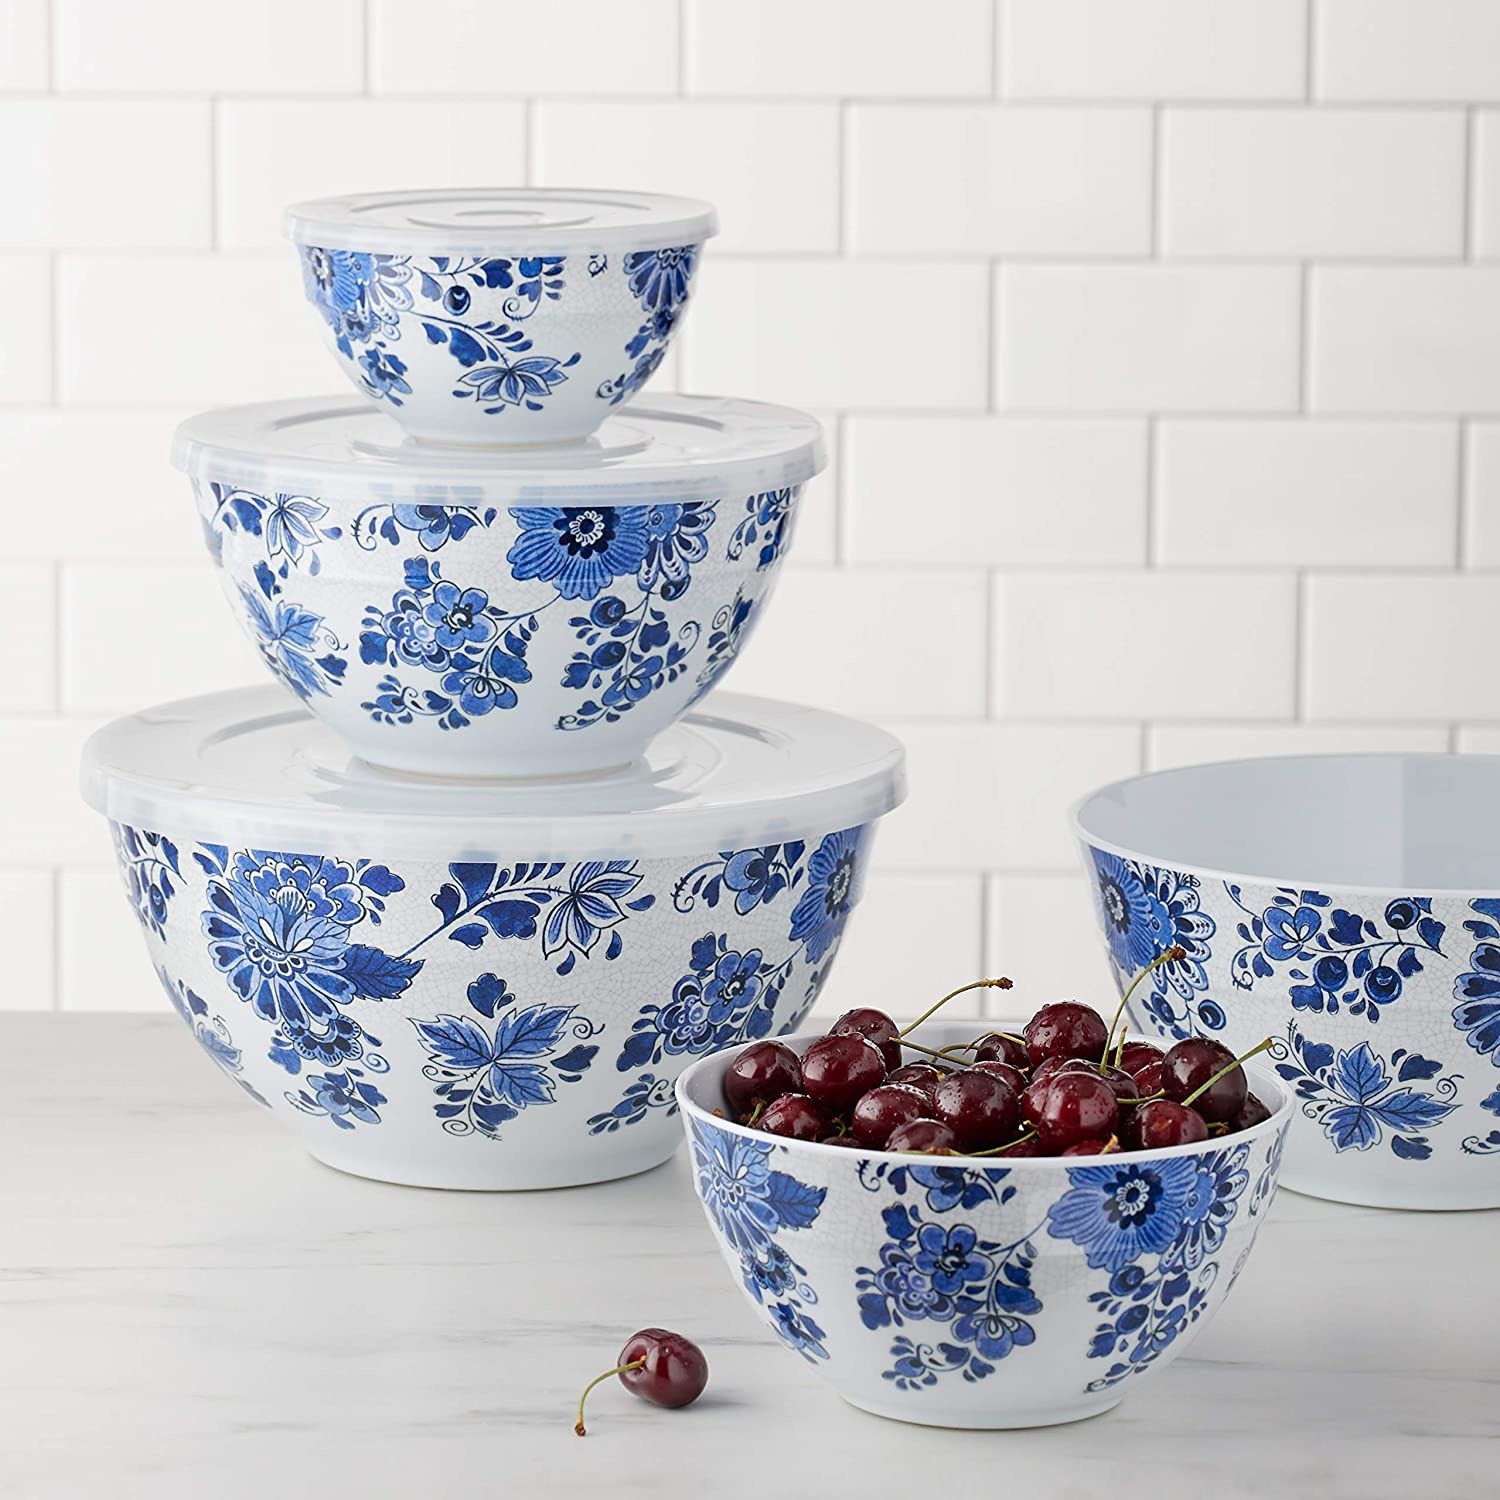 a set of patterned melamine bowls with matching lids on a kitchen counter